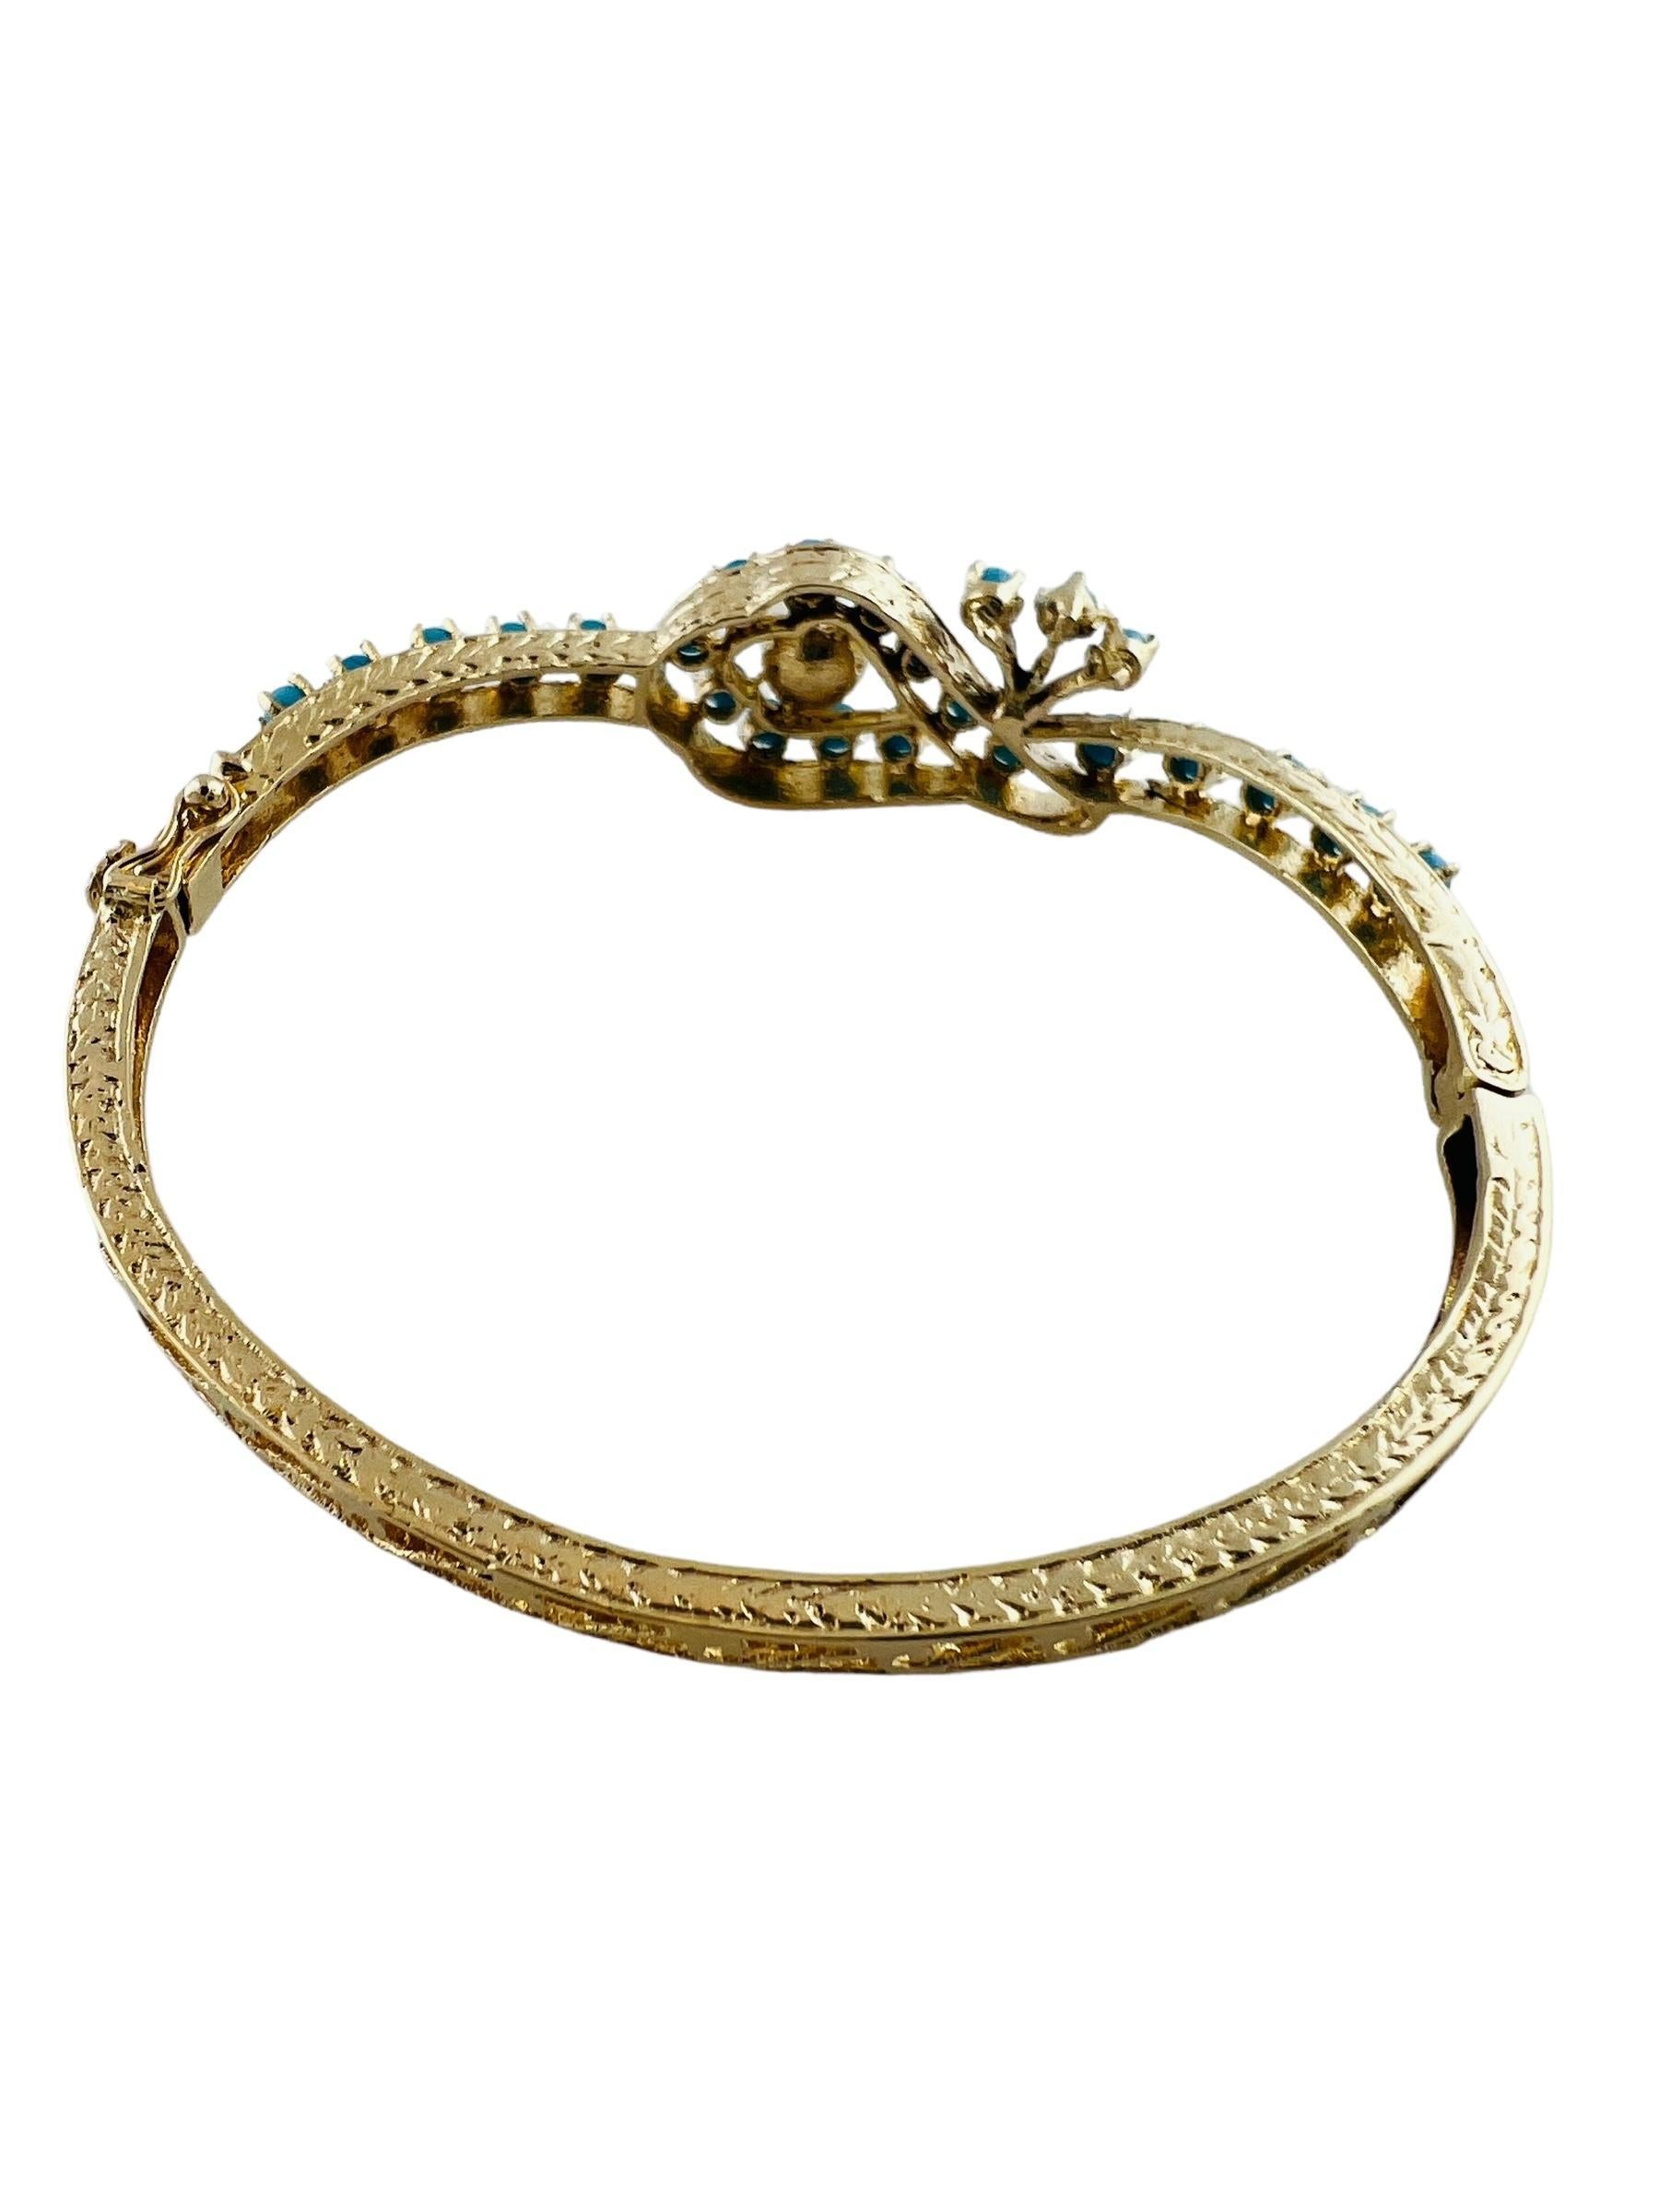 Women's 14K Yellow Gold Pearl and Turquoise Bangle Bracelet #16681